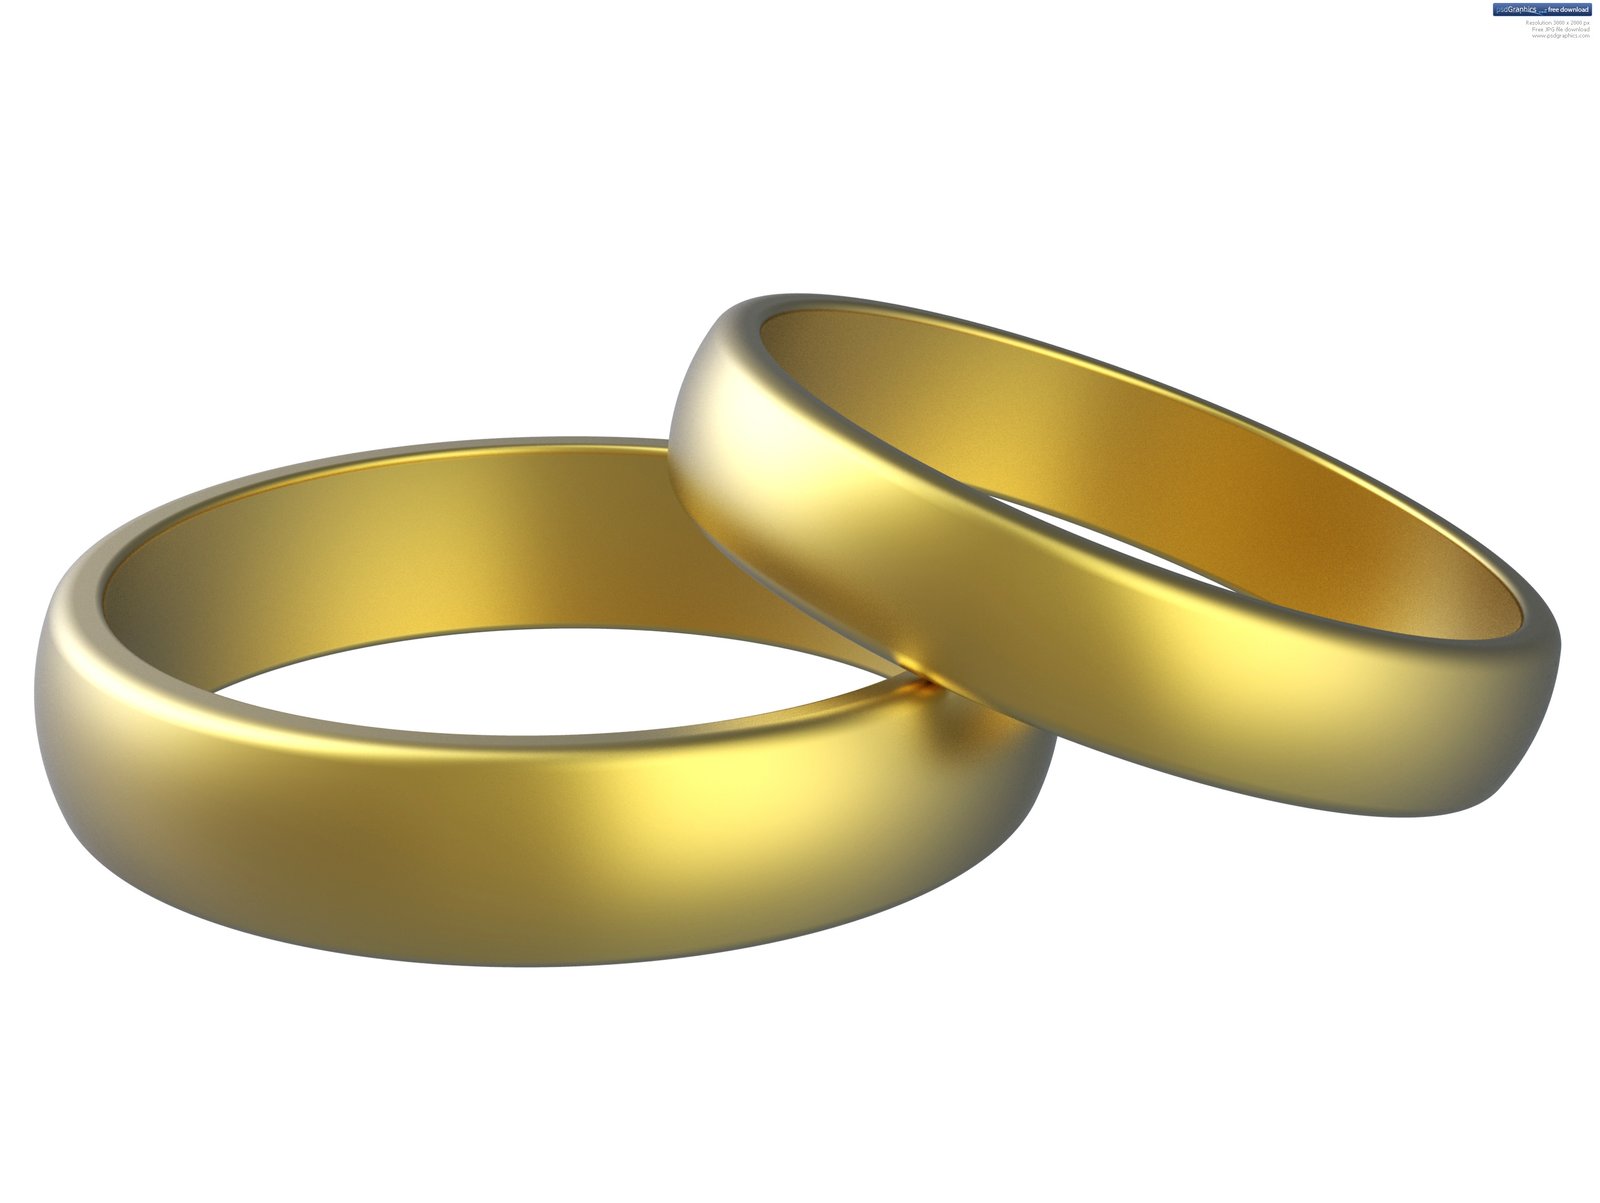 free clipart images wedding rings - photo #32